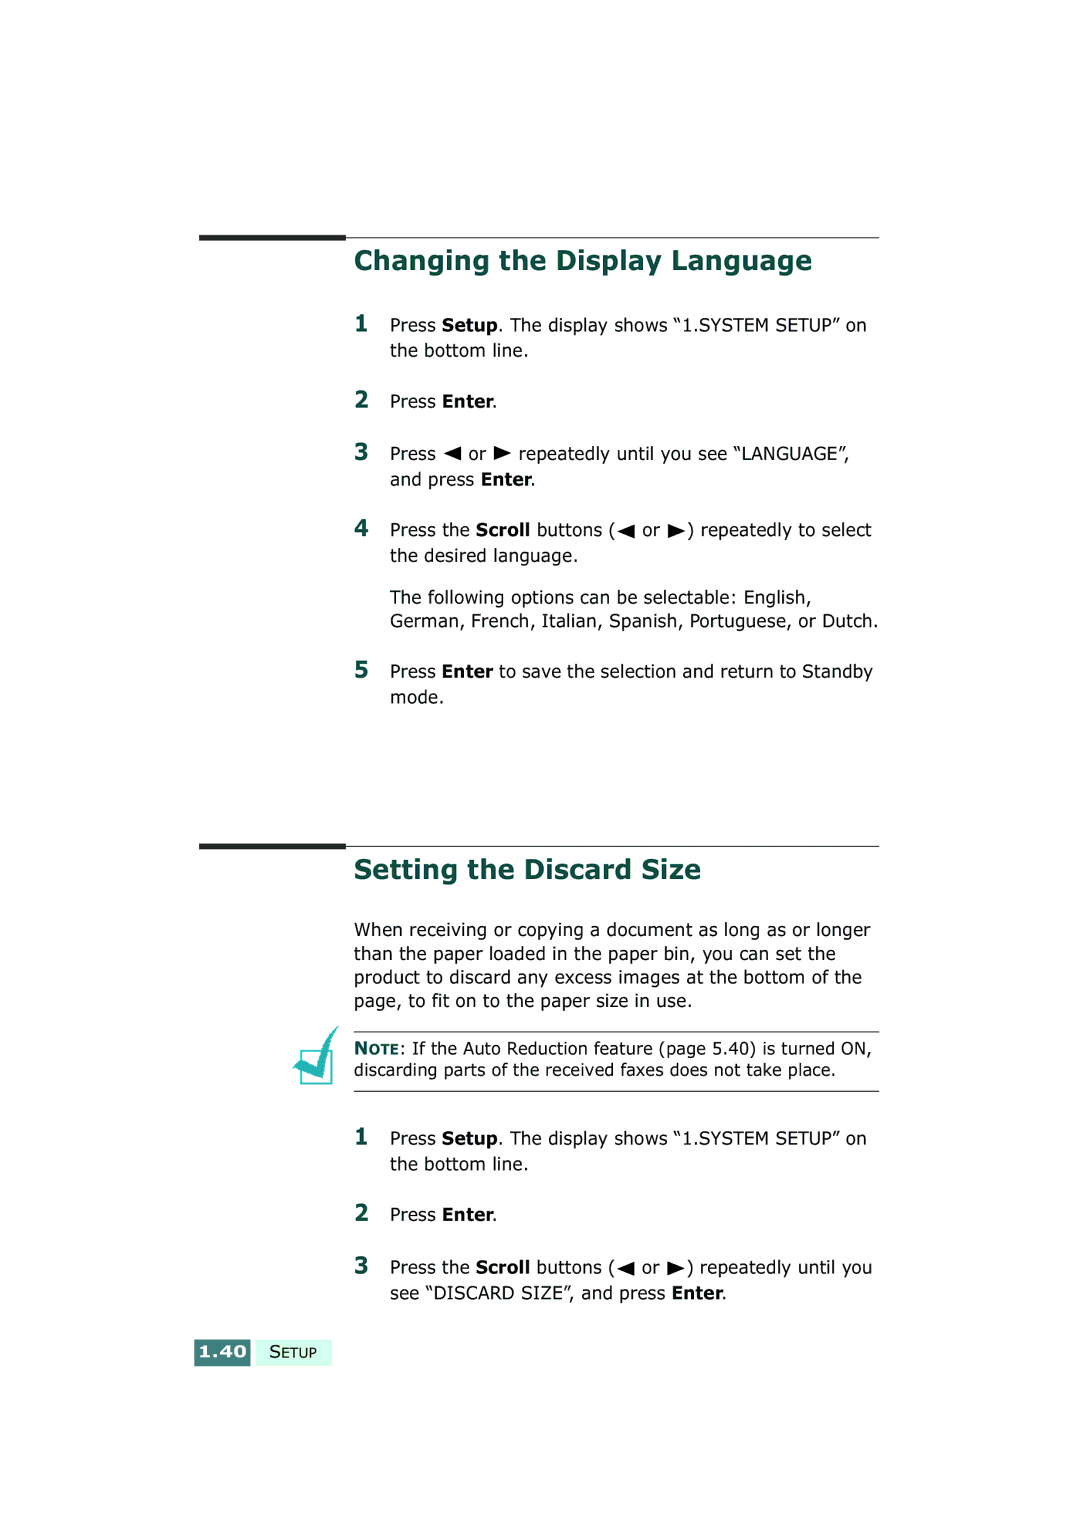 Samsung SF-430 manual Changing the Display Language, Setting the Discard Size 